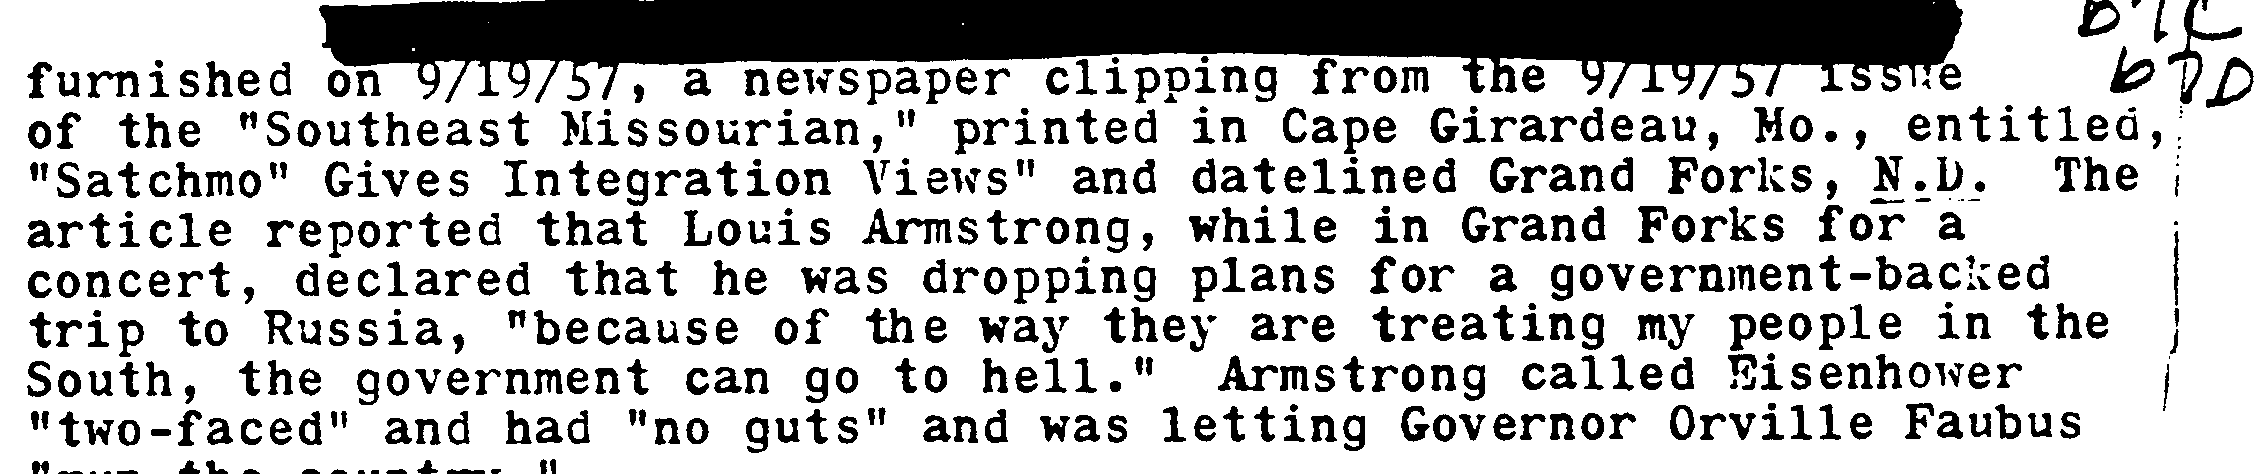 FBI quotes Armstrong as saying Eisenhower can go to hell